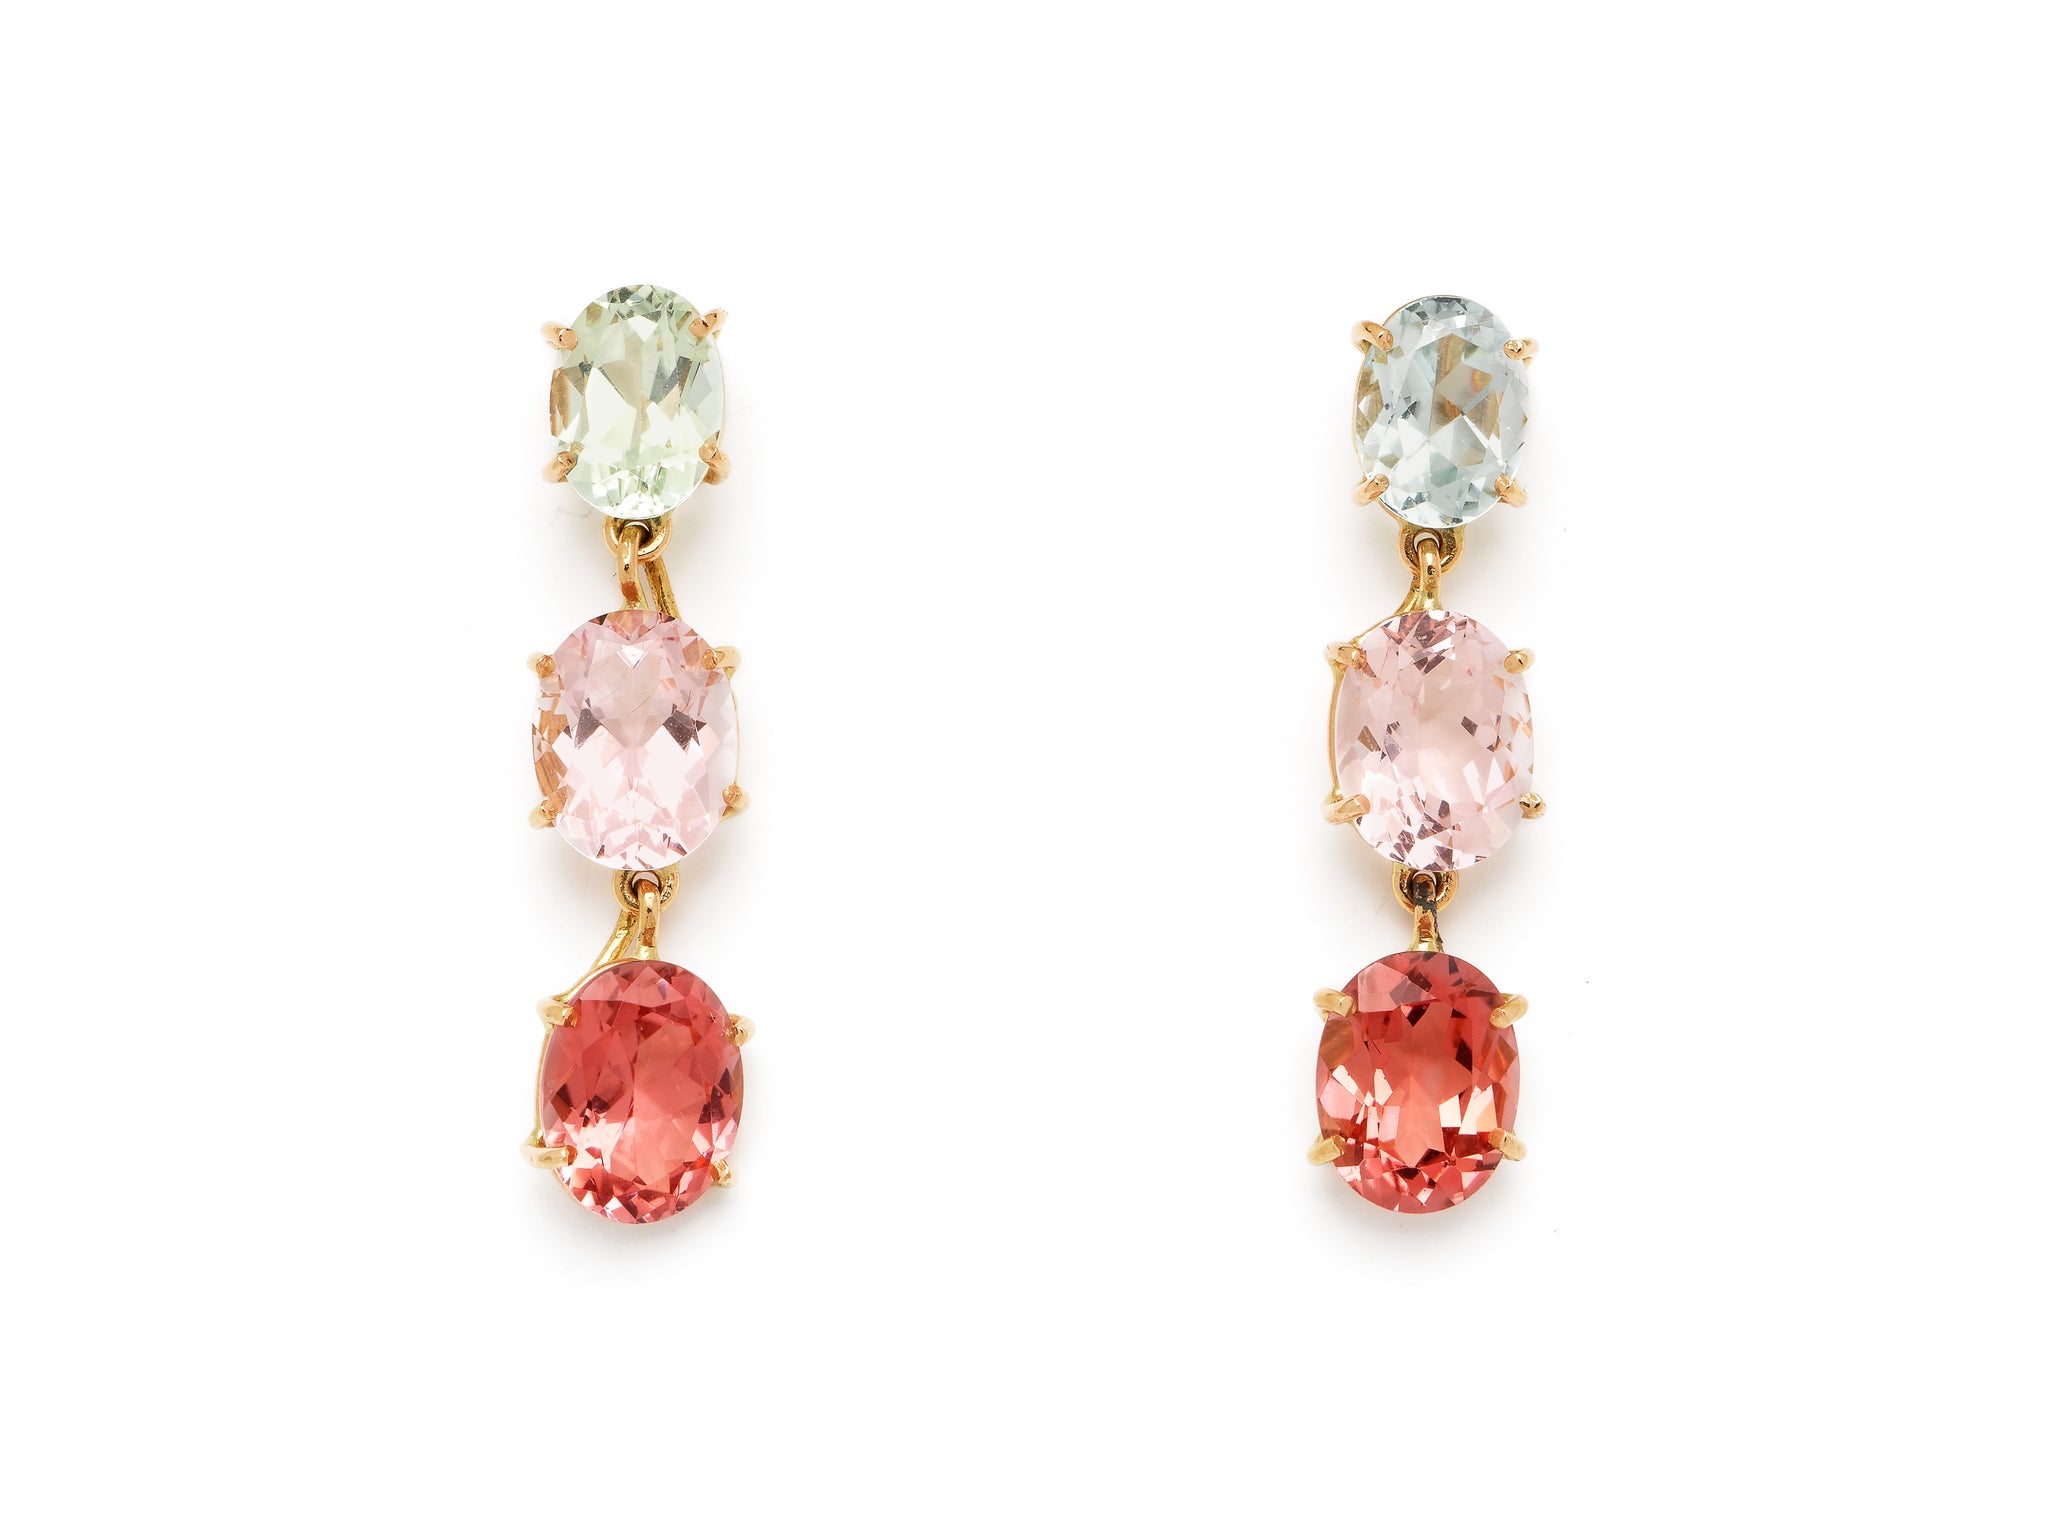 18 krt red gold earrings set with 4 Tourmalines and 2 Morganites